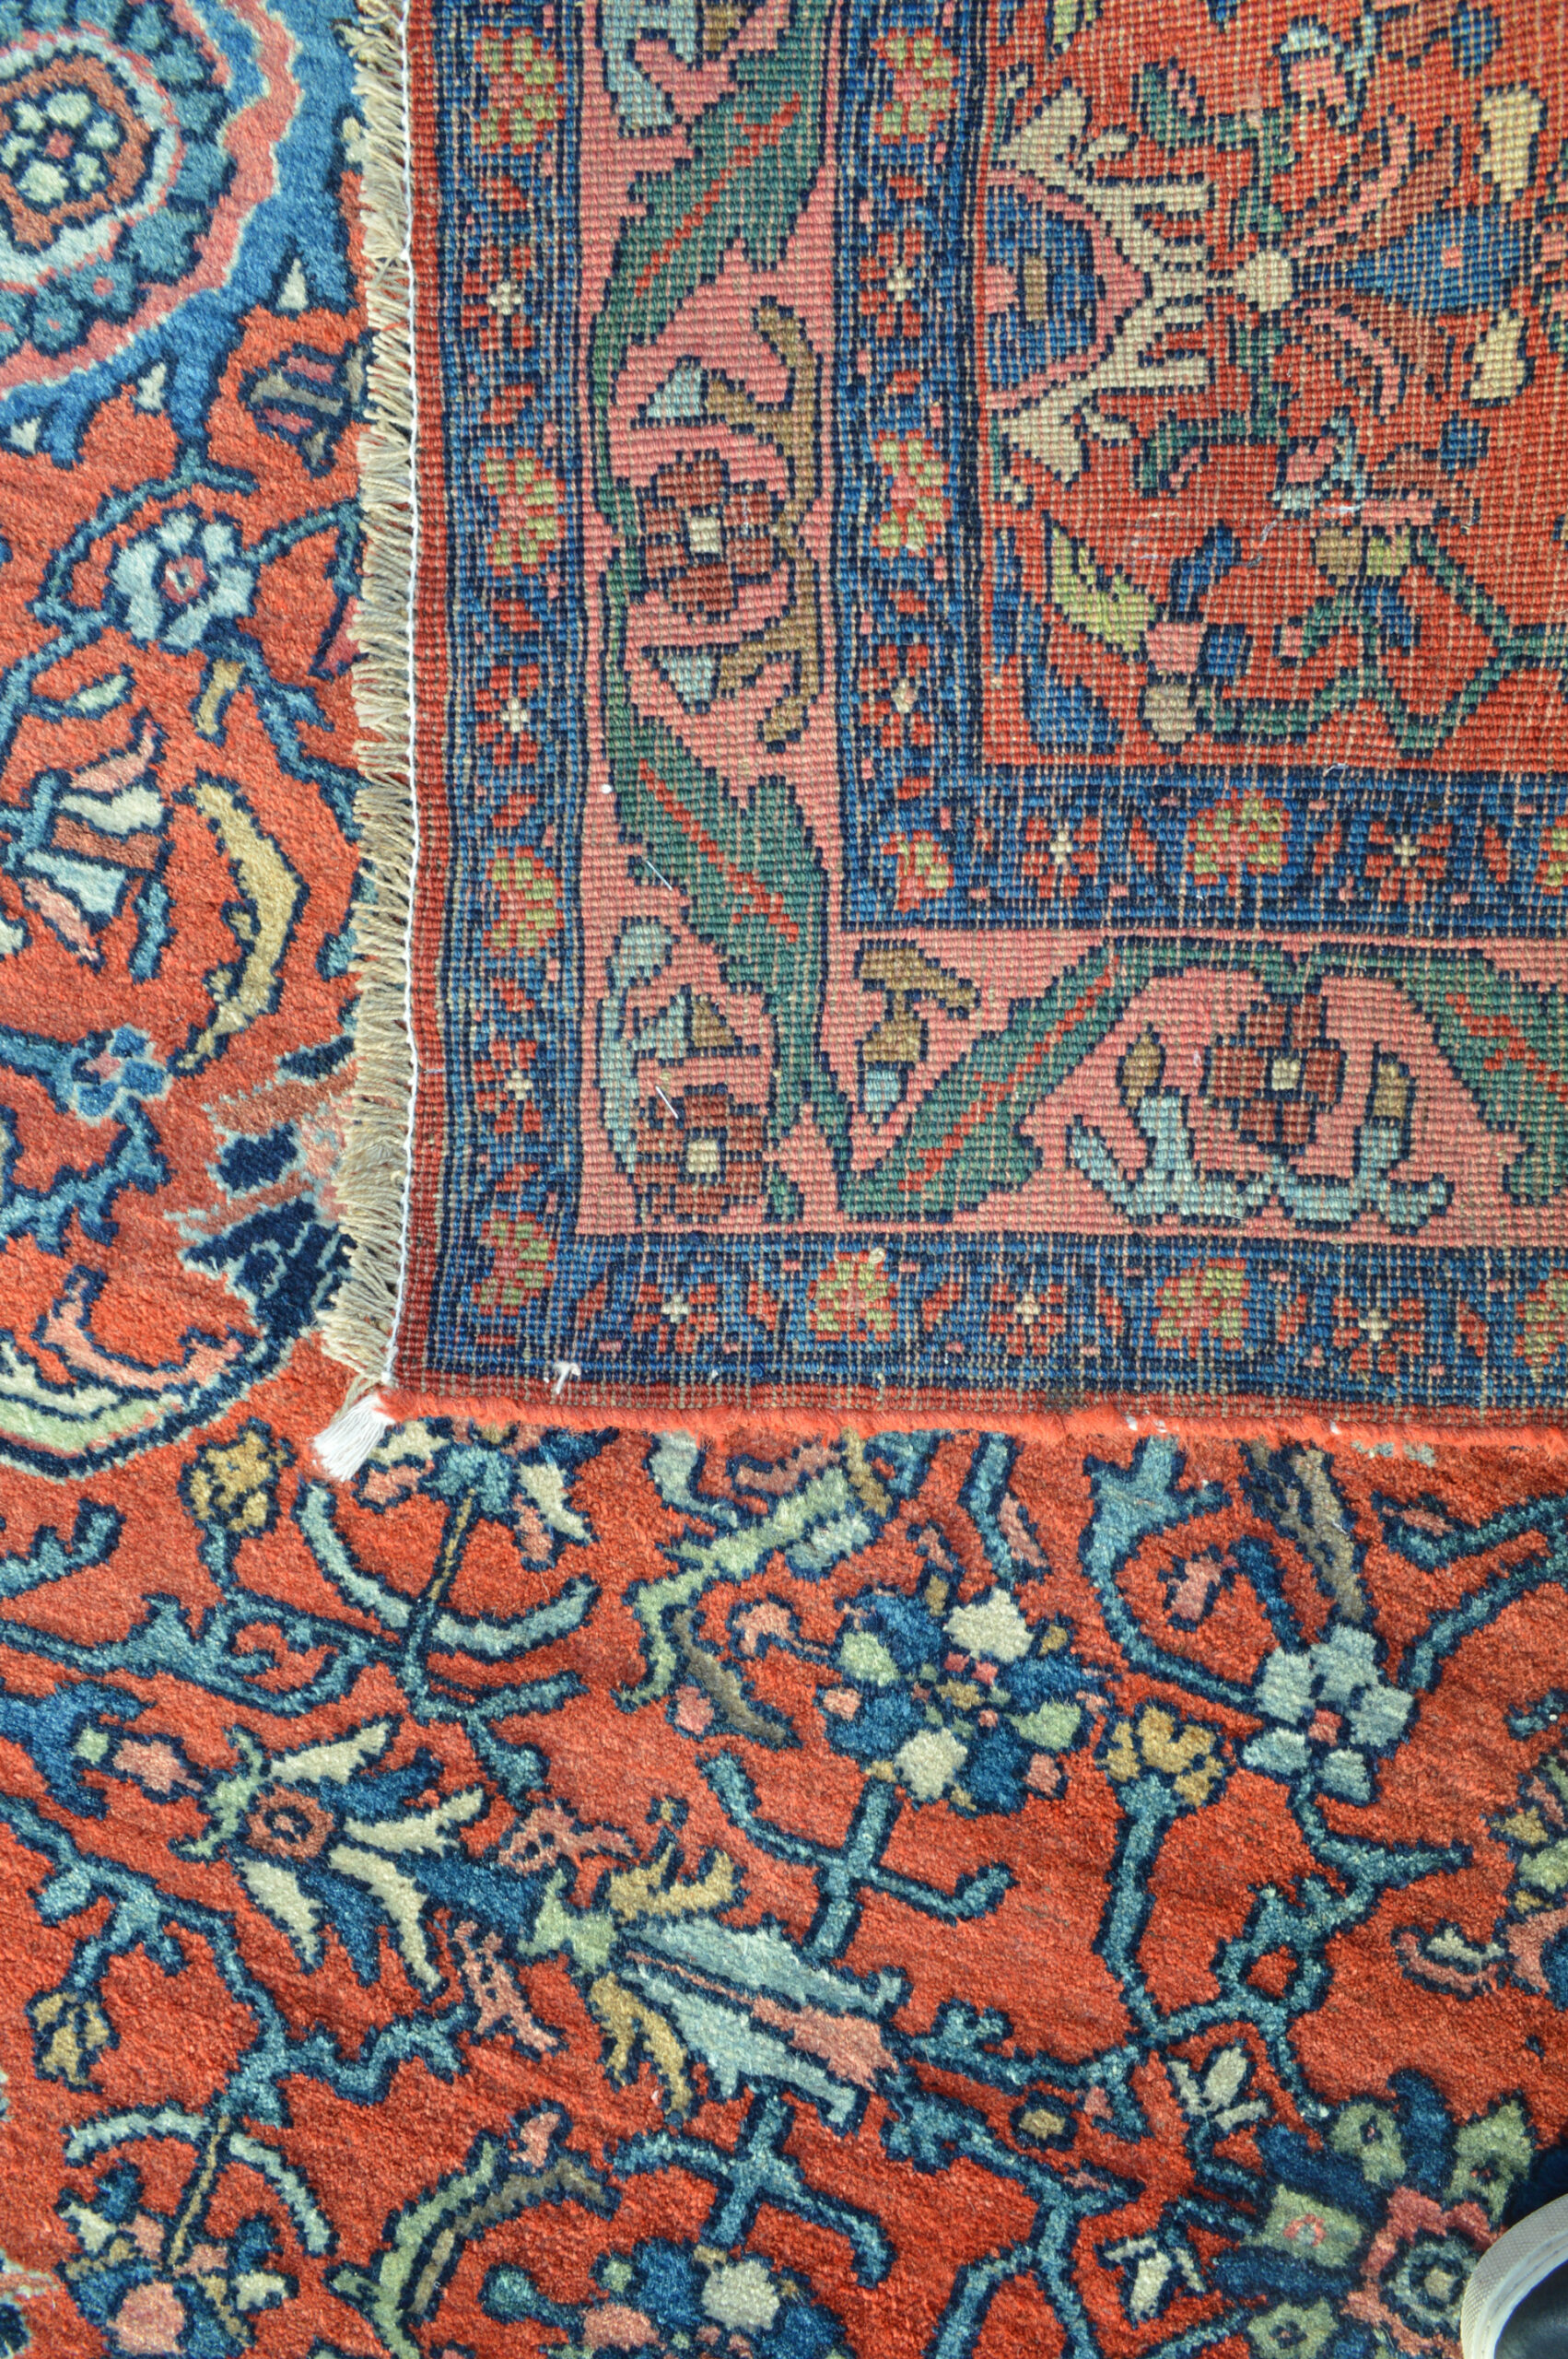 Weave detail from an antique Persian Bidjar runner rug with a coral and green border framing a salmon color field, Douglas Stock Gallery, antique Persian rugs, antique Persian runners, antique Persian carpets